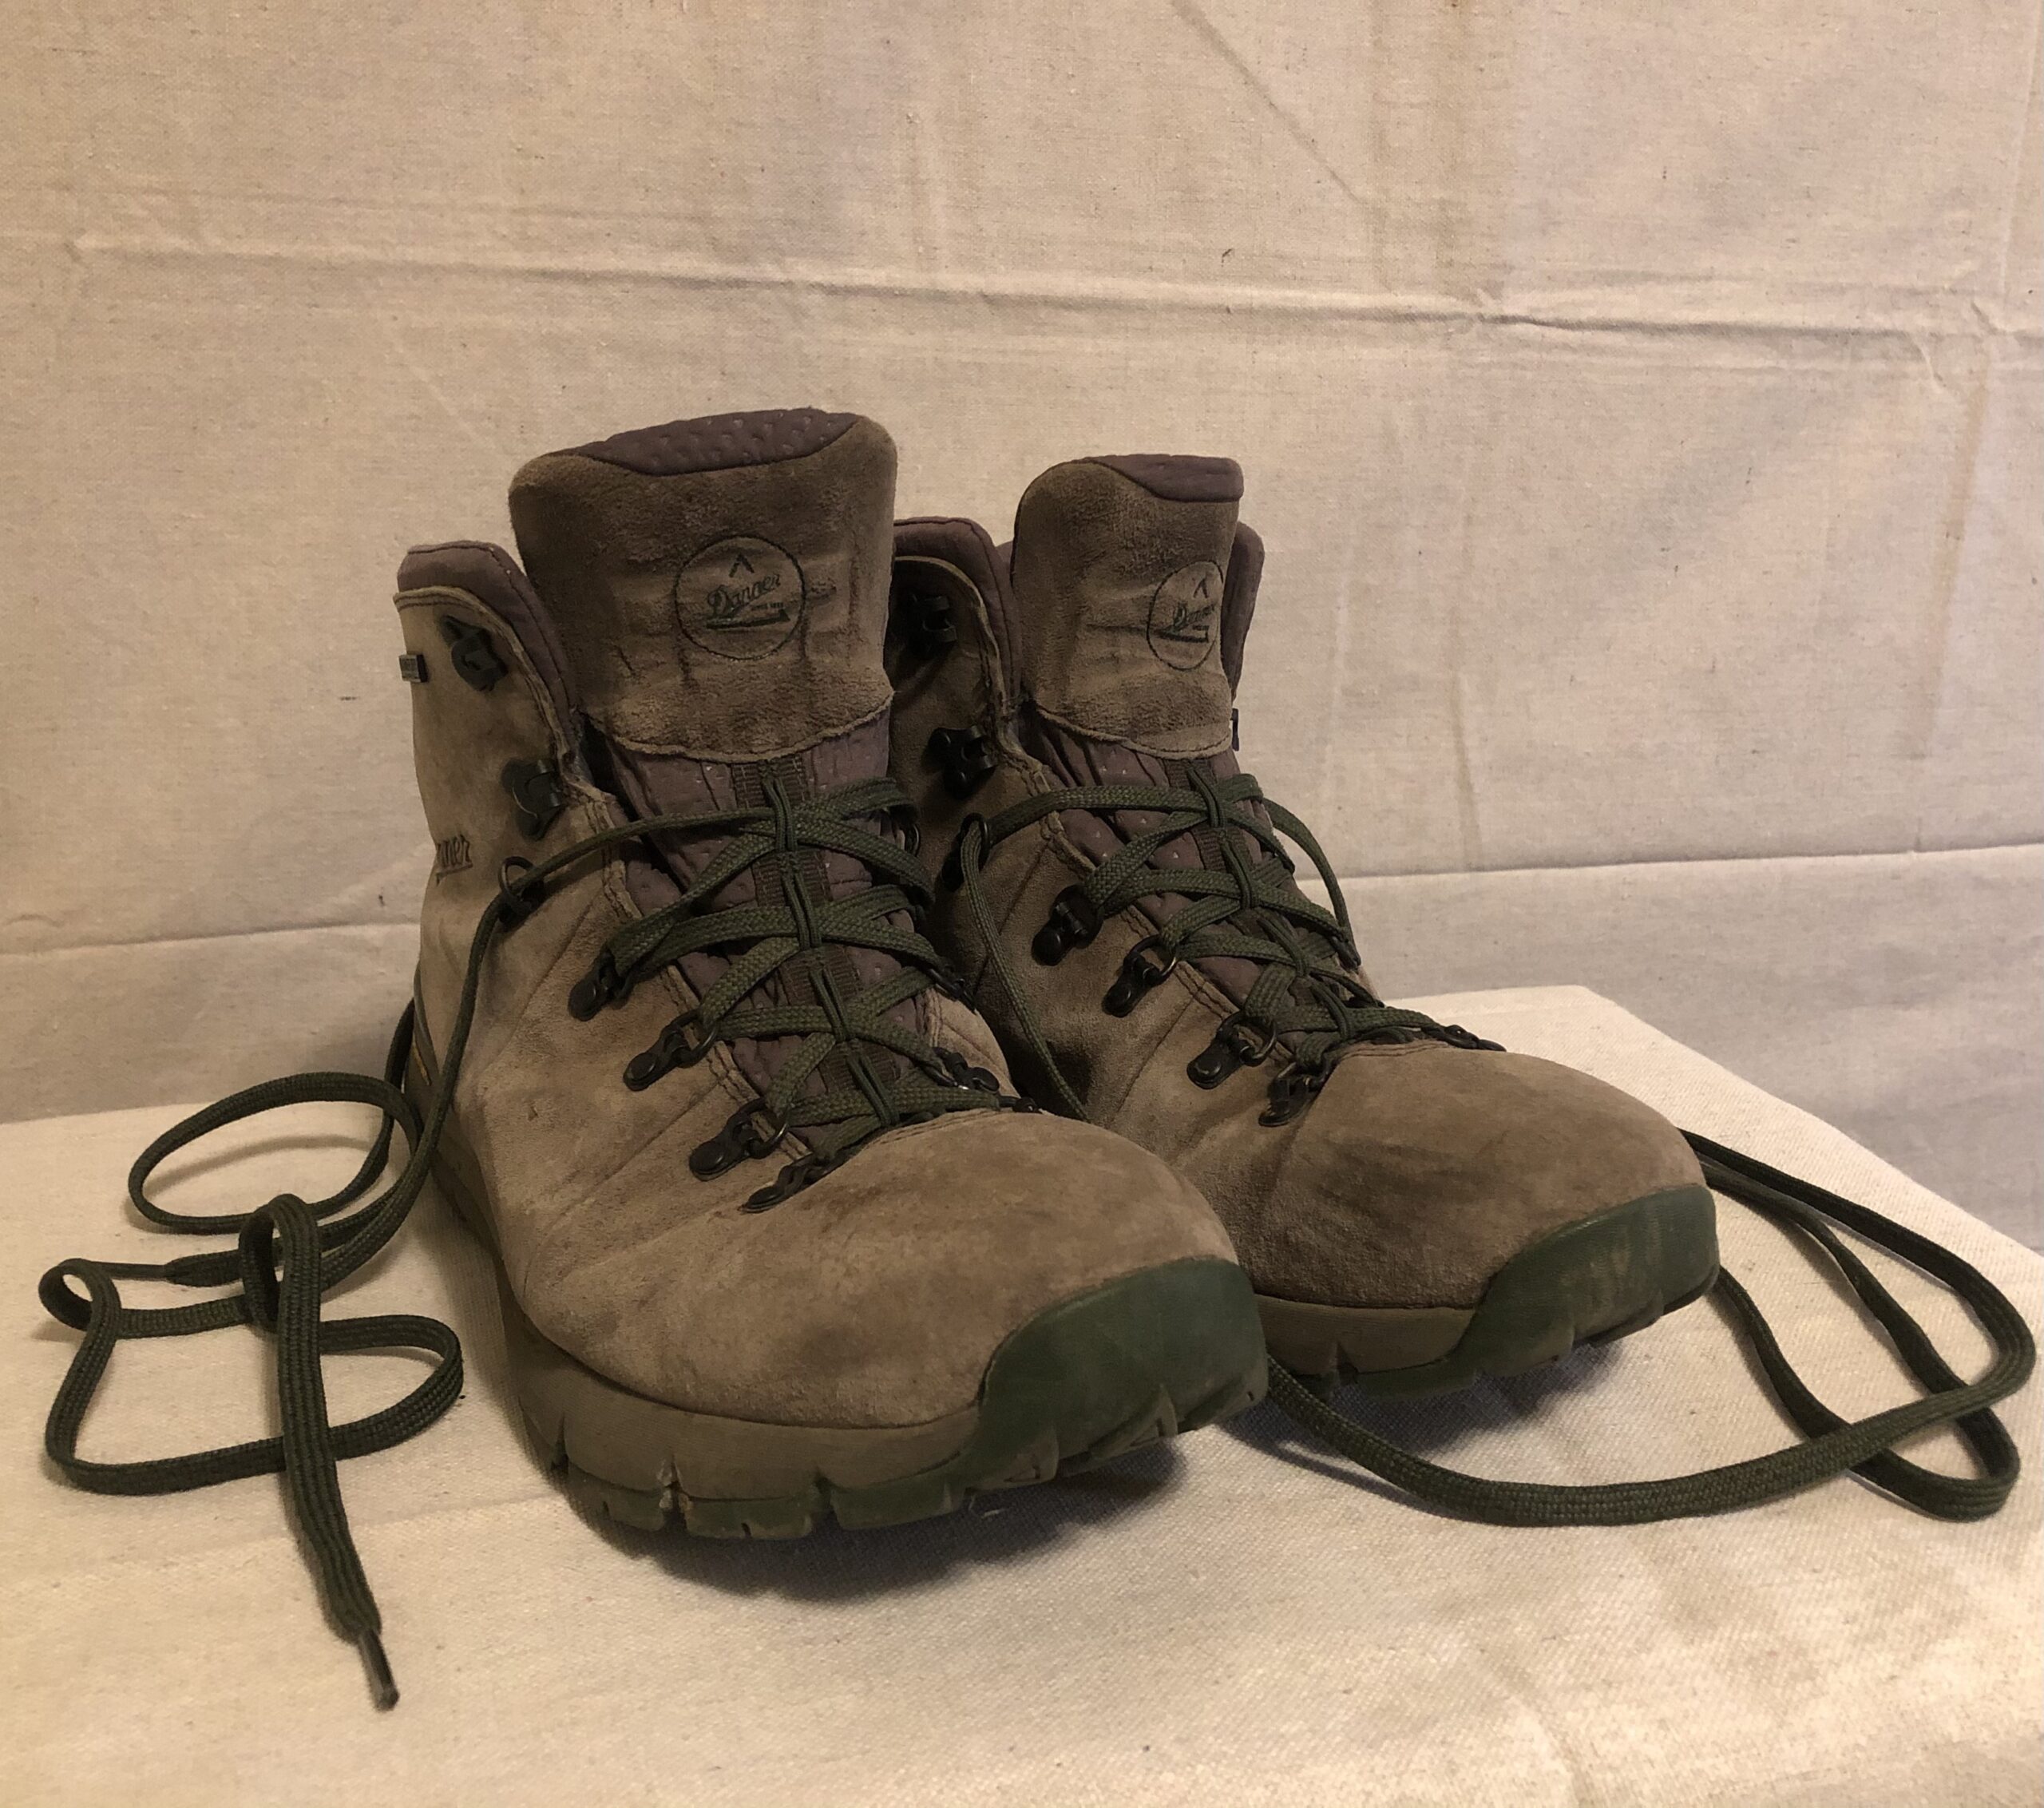 A pair of hiking boots with laces untied stationed atop a surface.